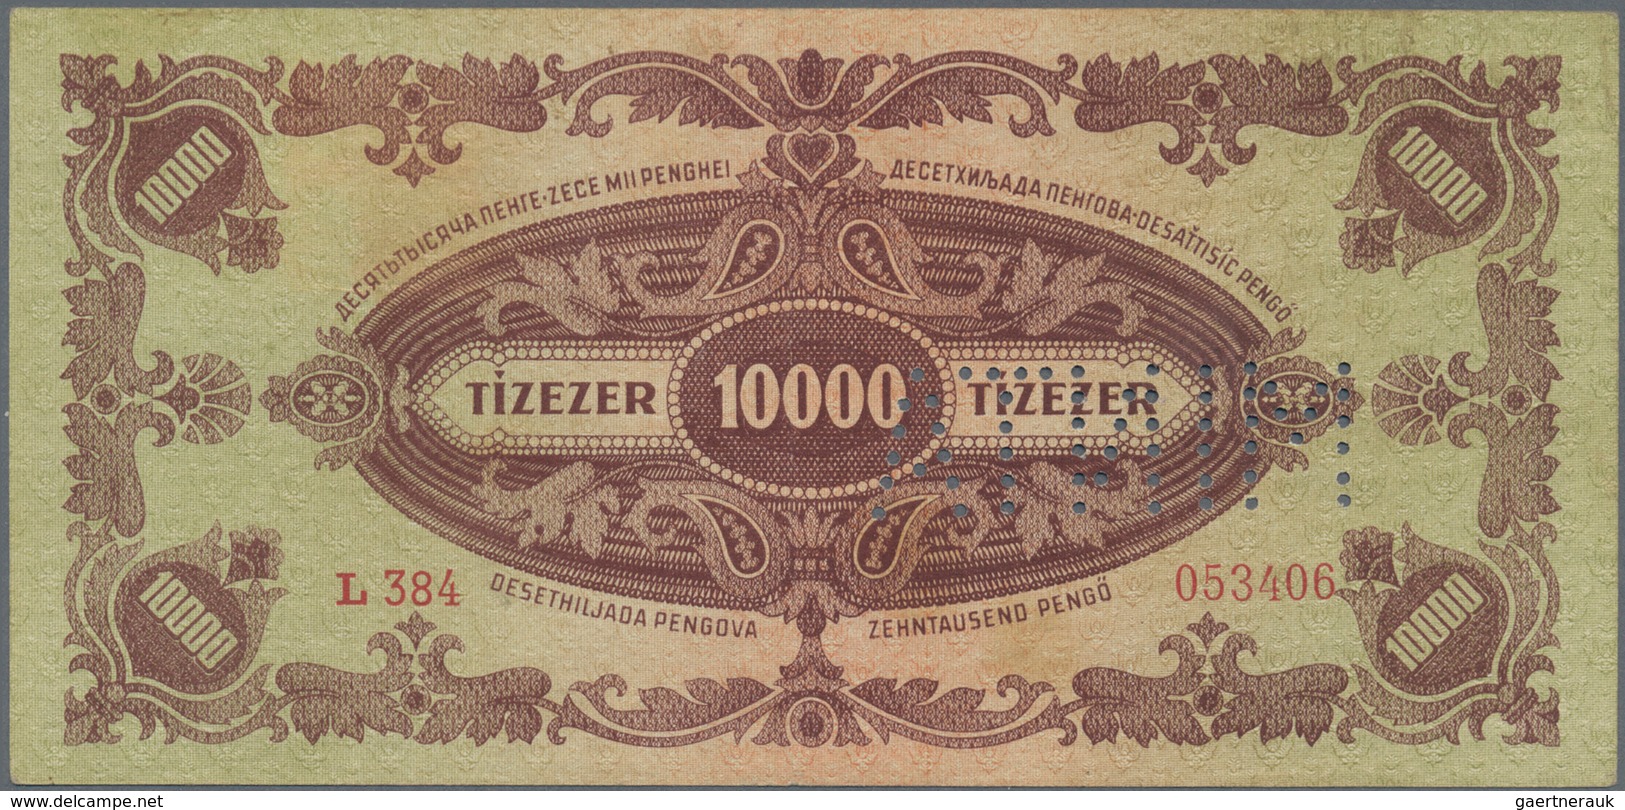 01704 Hungary / Ungarn: 10.000 Pengö 1945 Specimen, P.119s With Perforation "MINTA", Vertically Folded And - Hungría